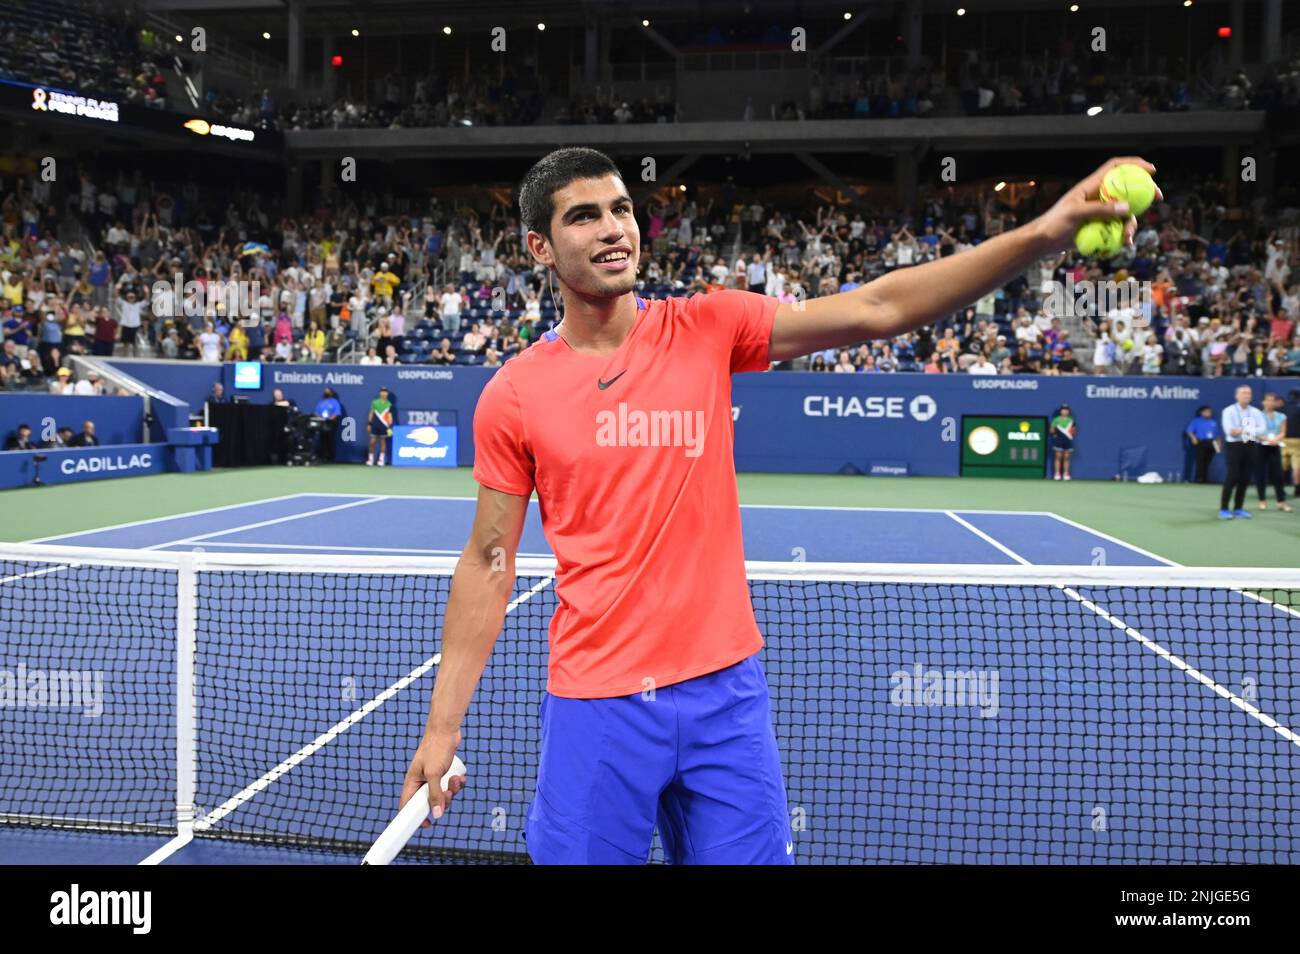 Carlos Alcaraz during the Tennis Plays For Peace event at the 2022 US Open, Wednesday, Aug